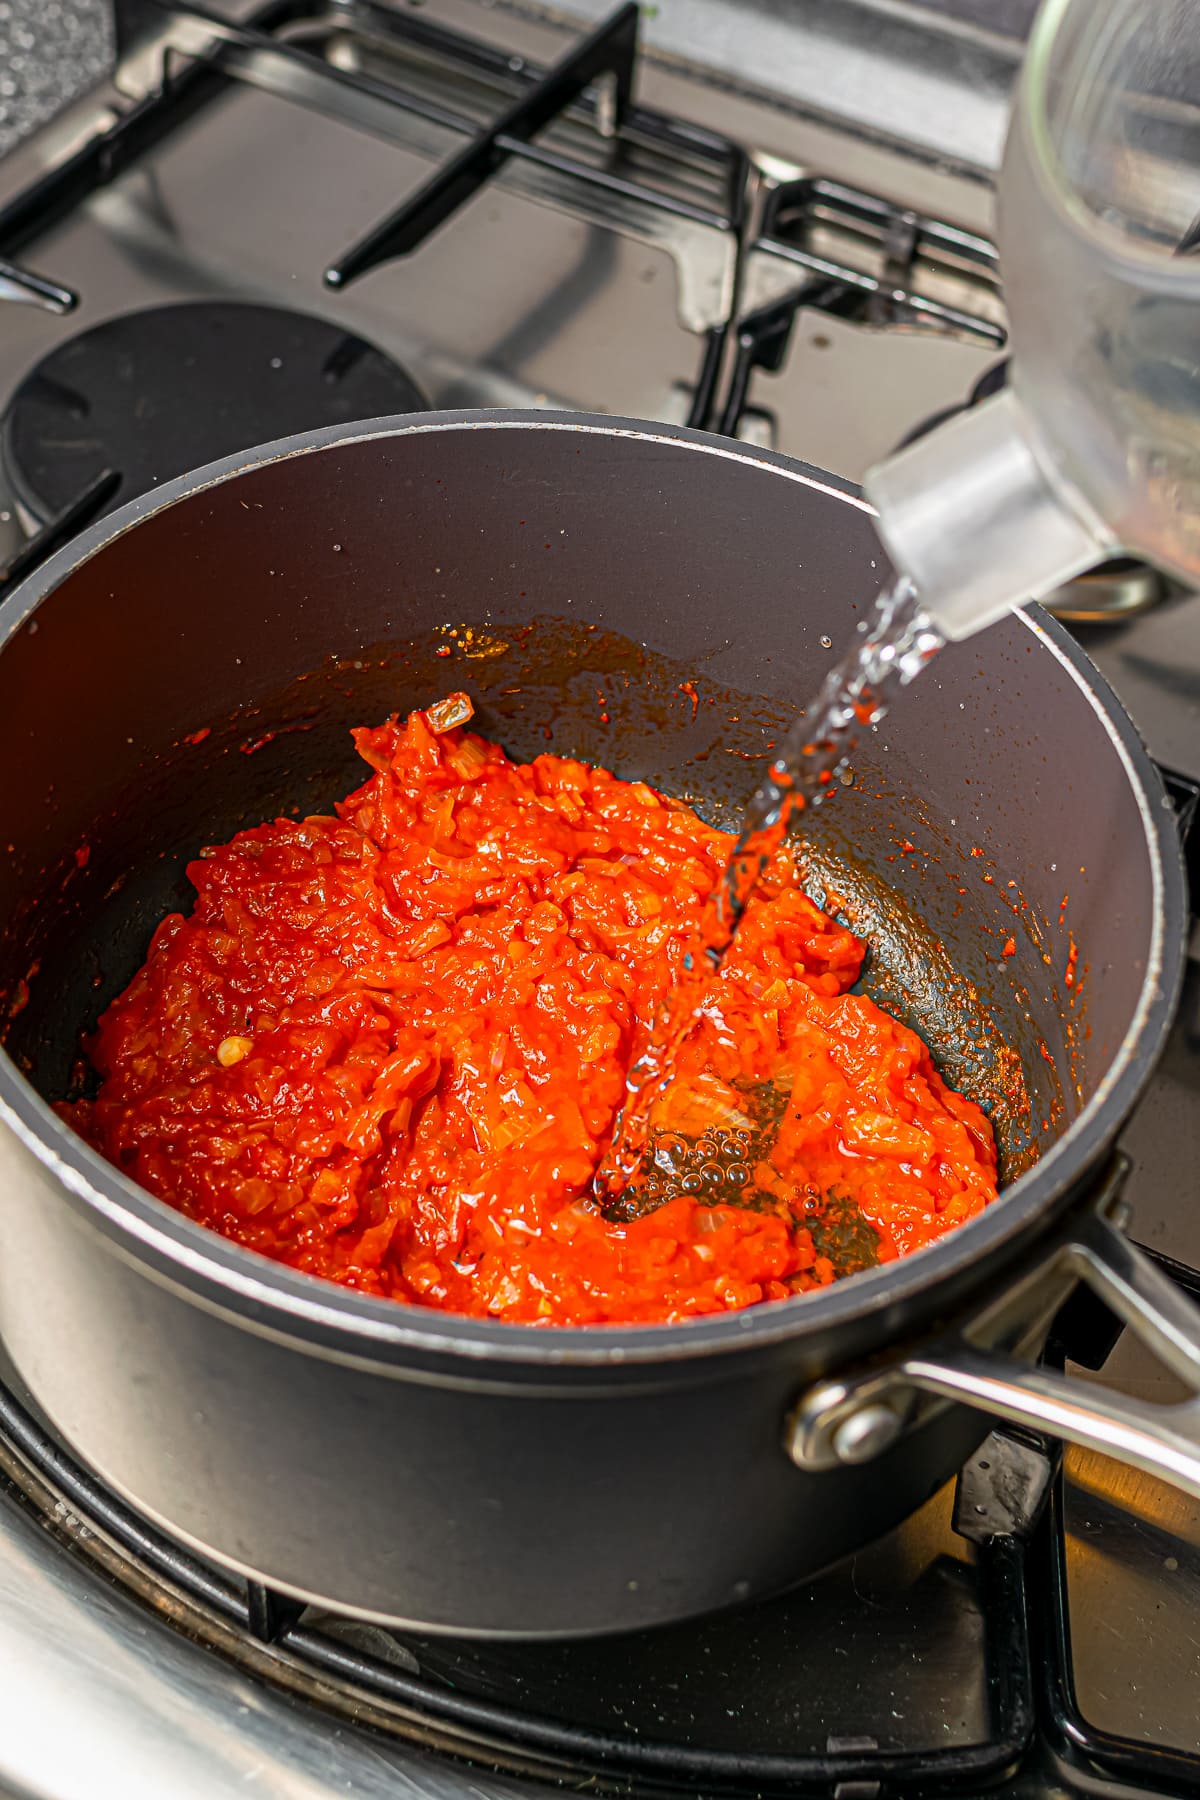 Water being poured into a pot containing a tomato-based soup mixture on the stove.